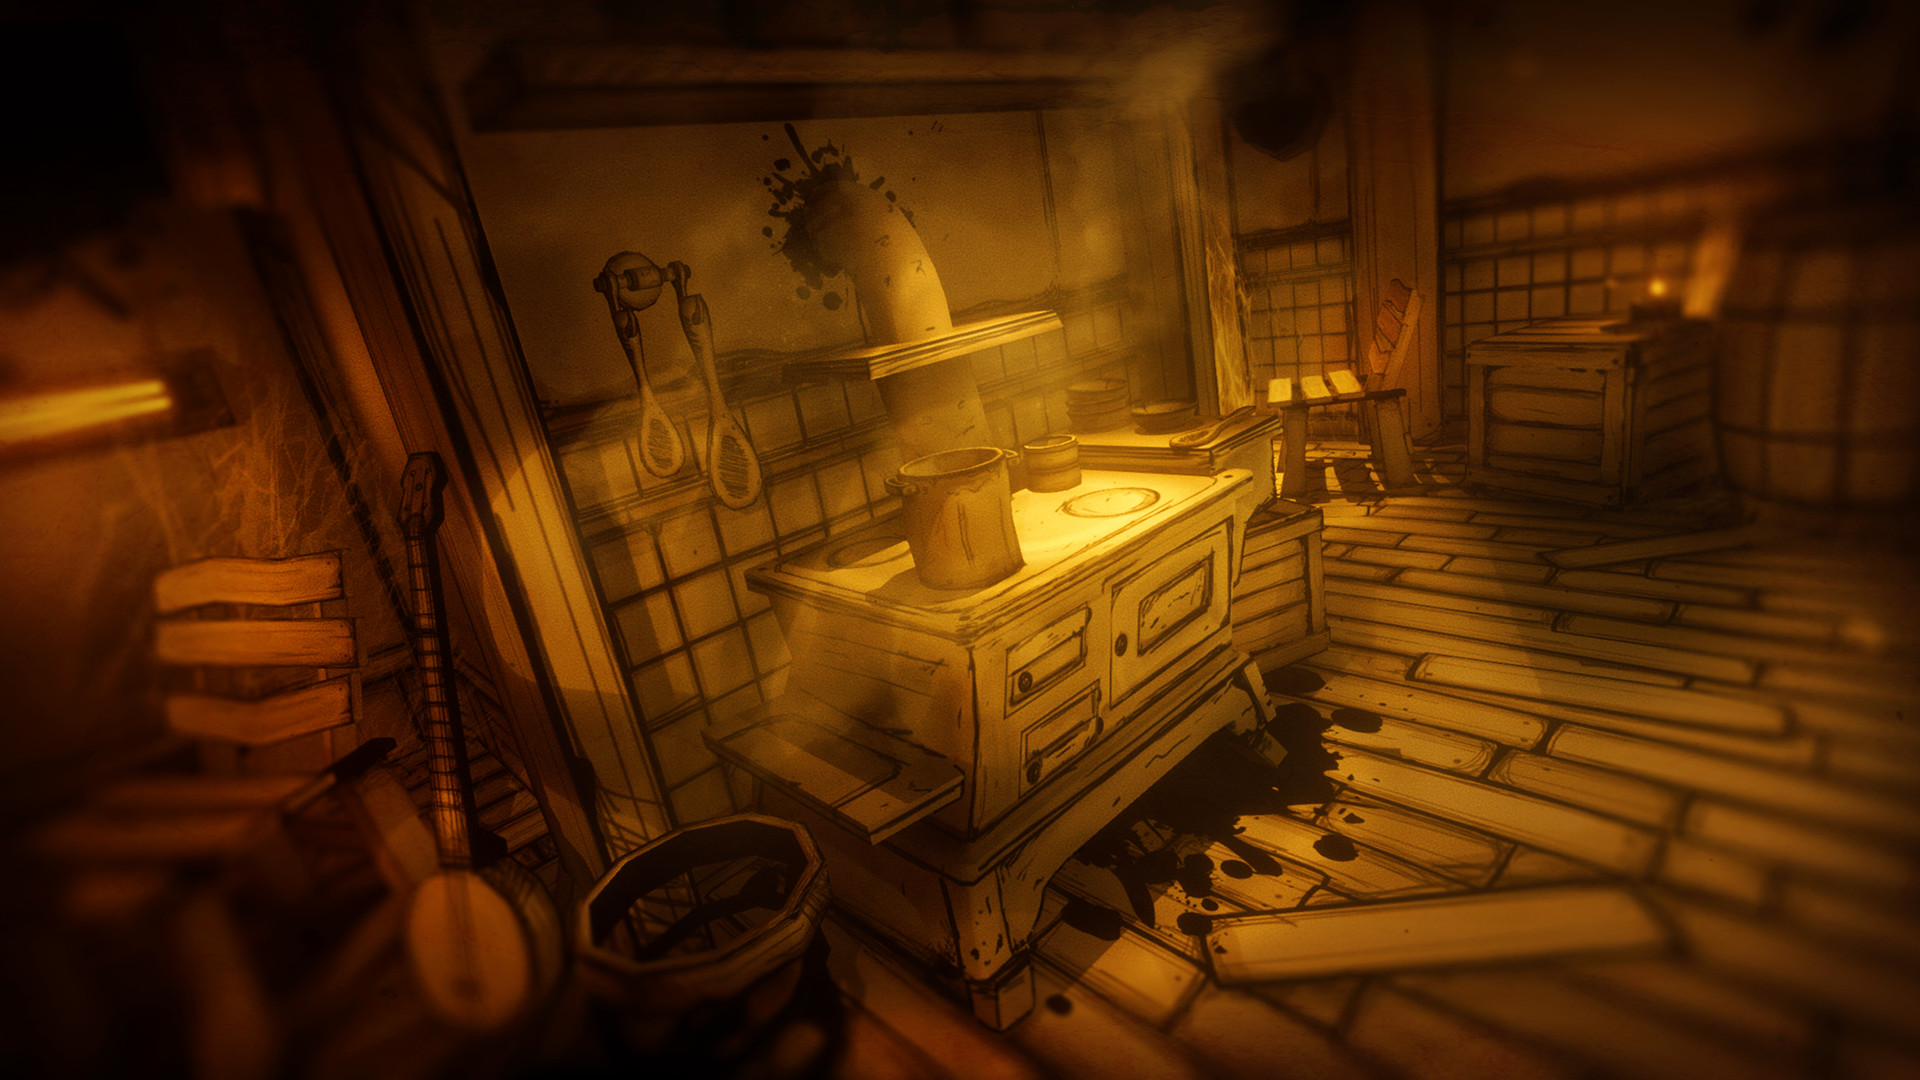 bendy and the ink machine chapter 1 free no download